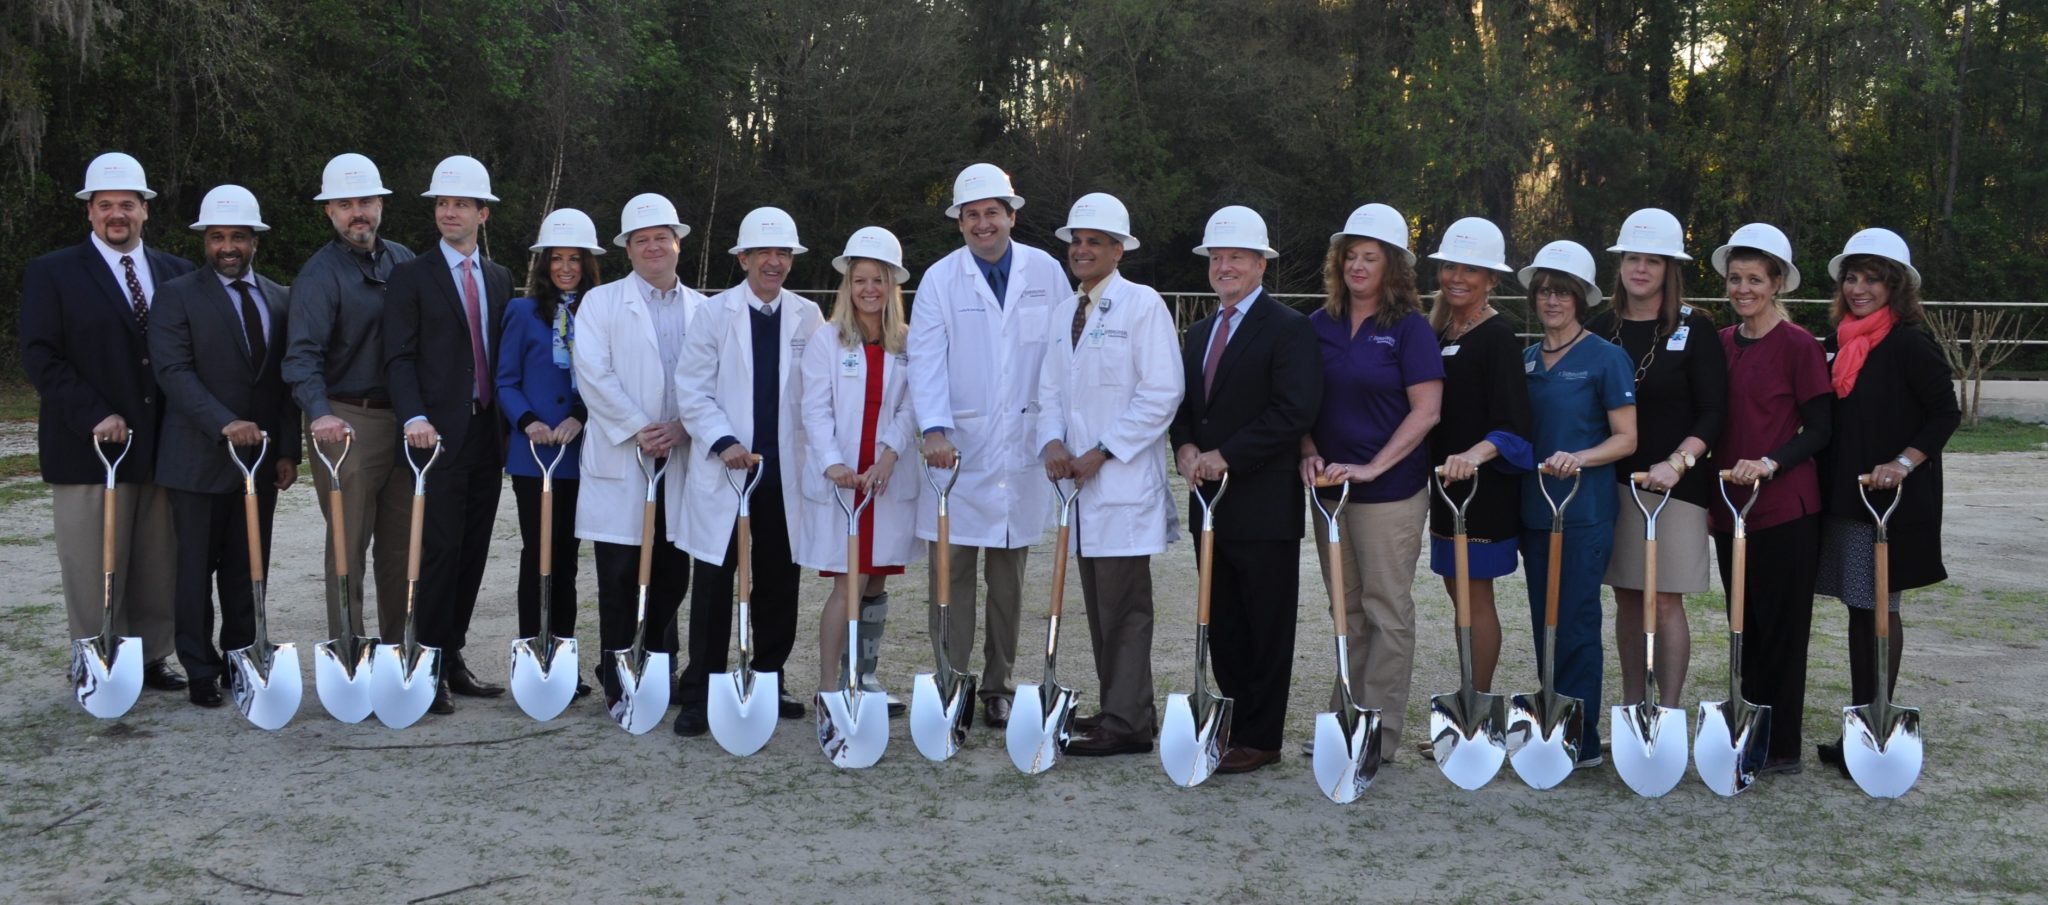 Florida Cancer Specialists & Research Institute (FCS) Announces $10 Million Cancer Facility